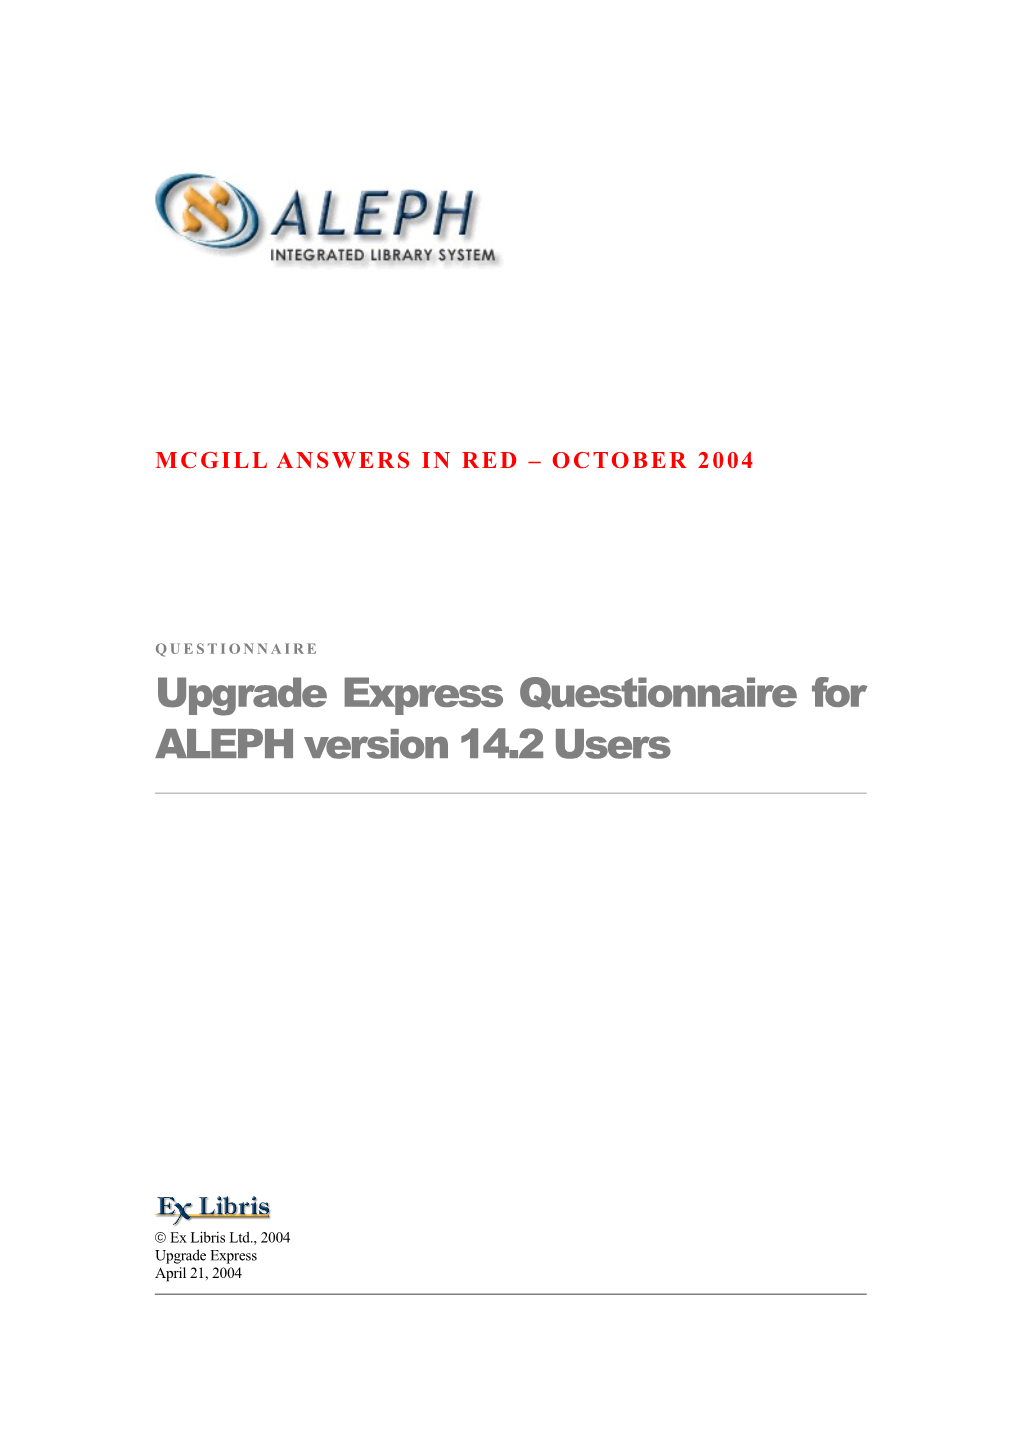 Upgrade Express Questionnaire For ALEPH Version 14.2 Users